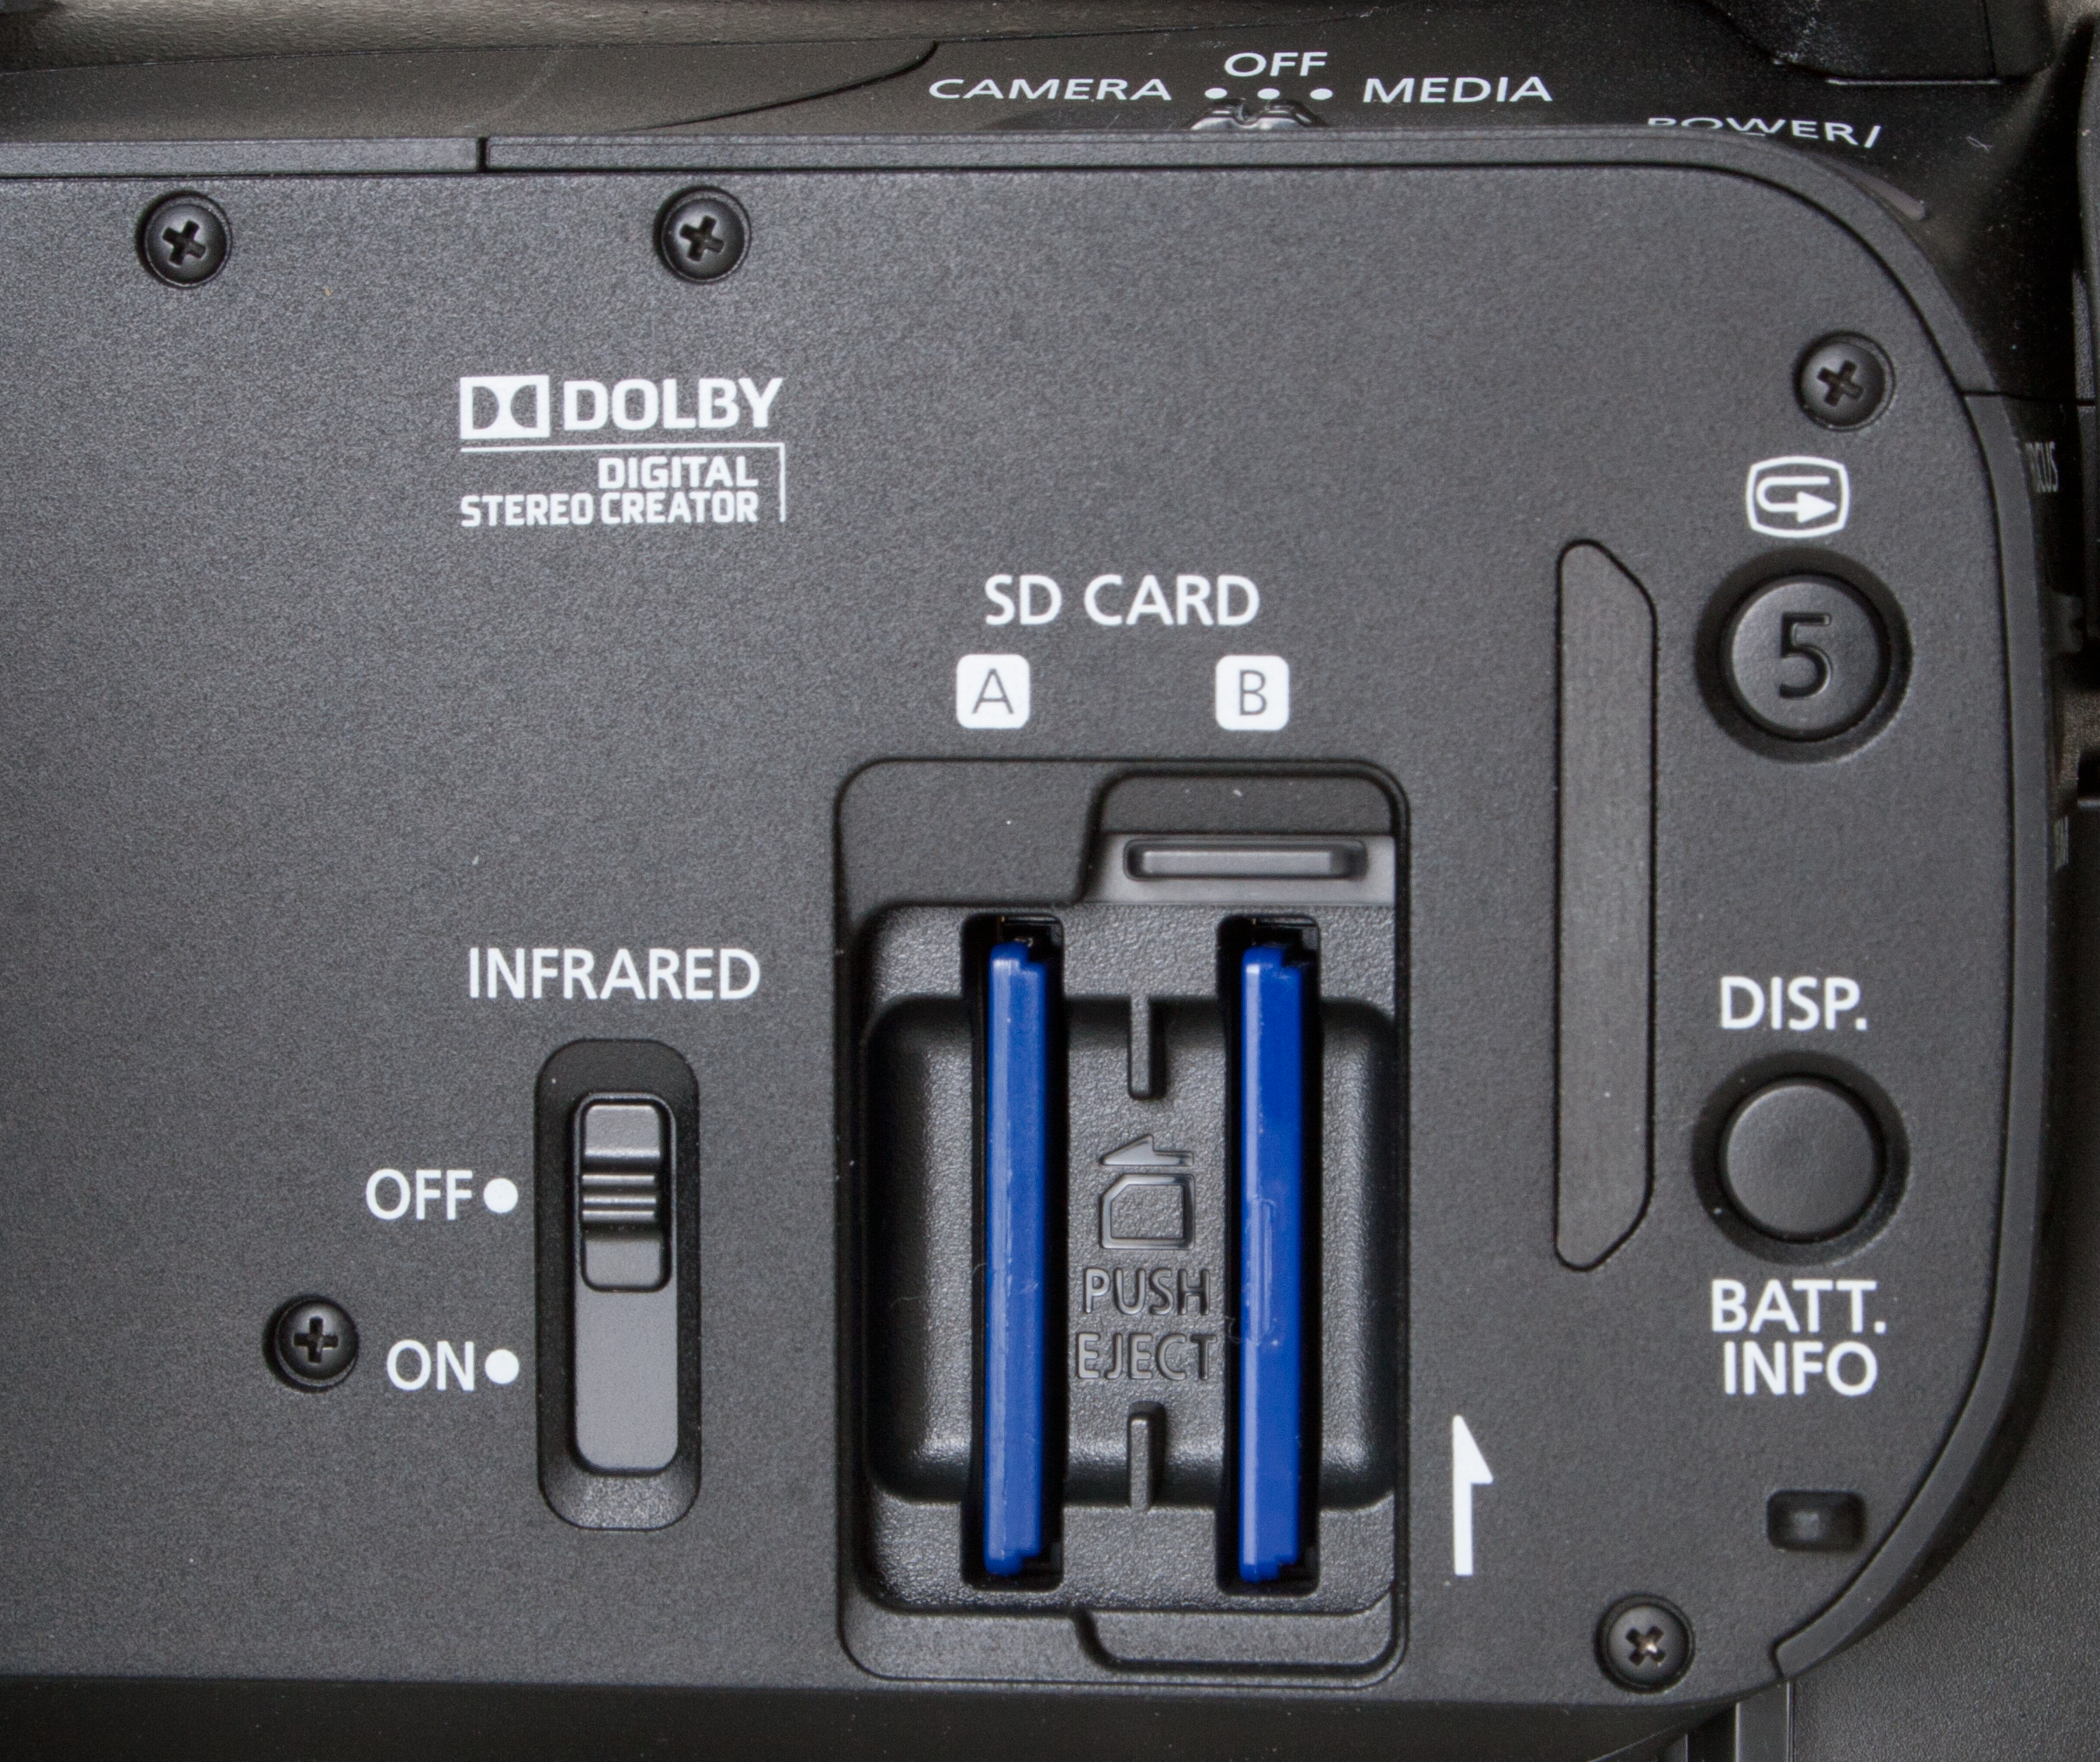 Dual SD Card Slots and Infrared Switch